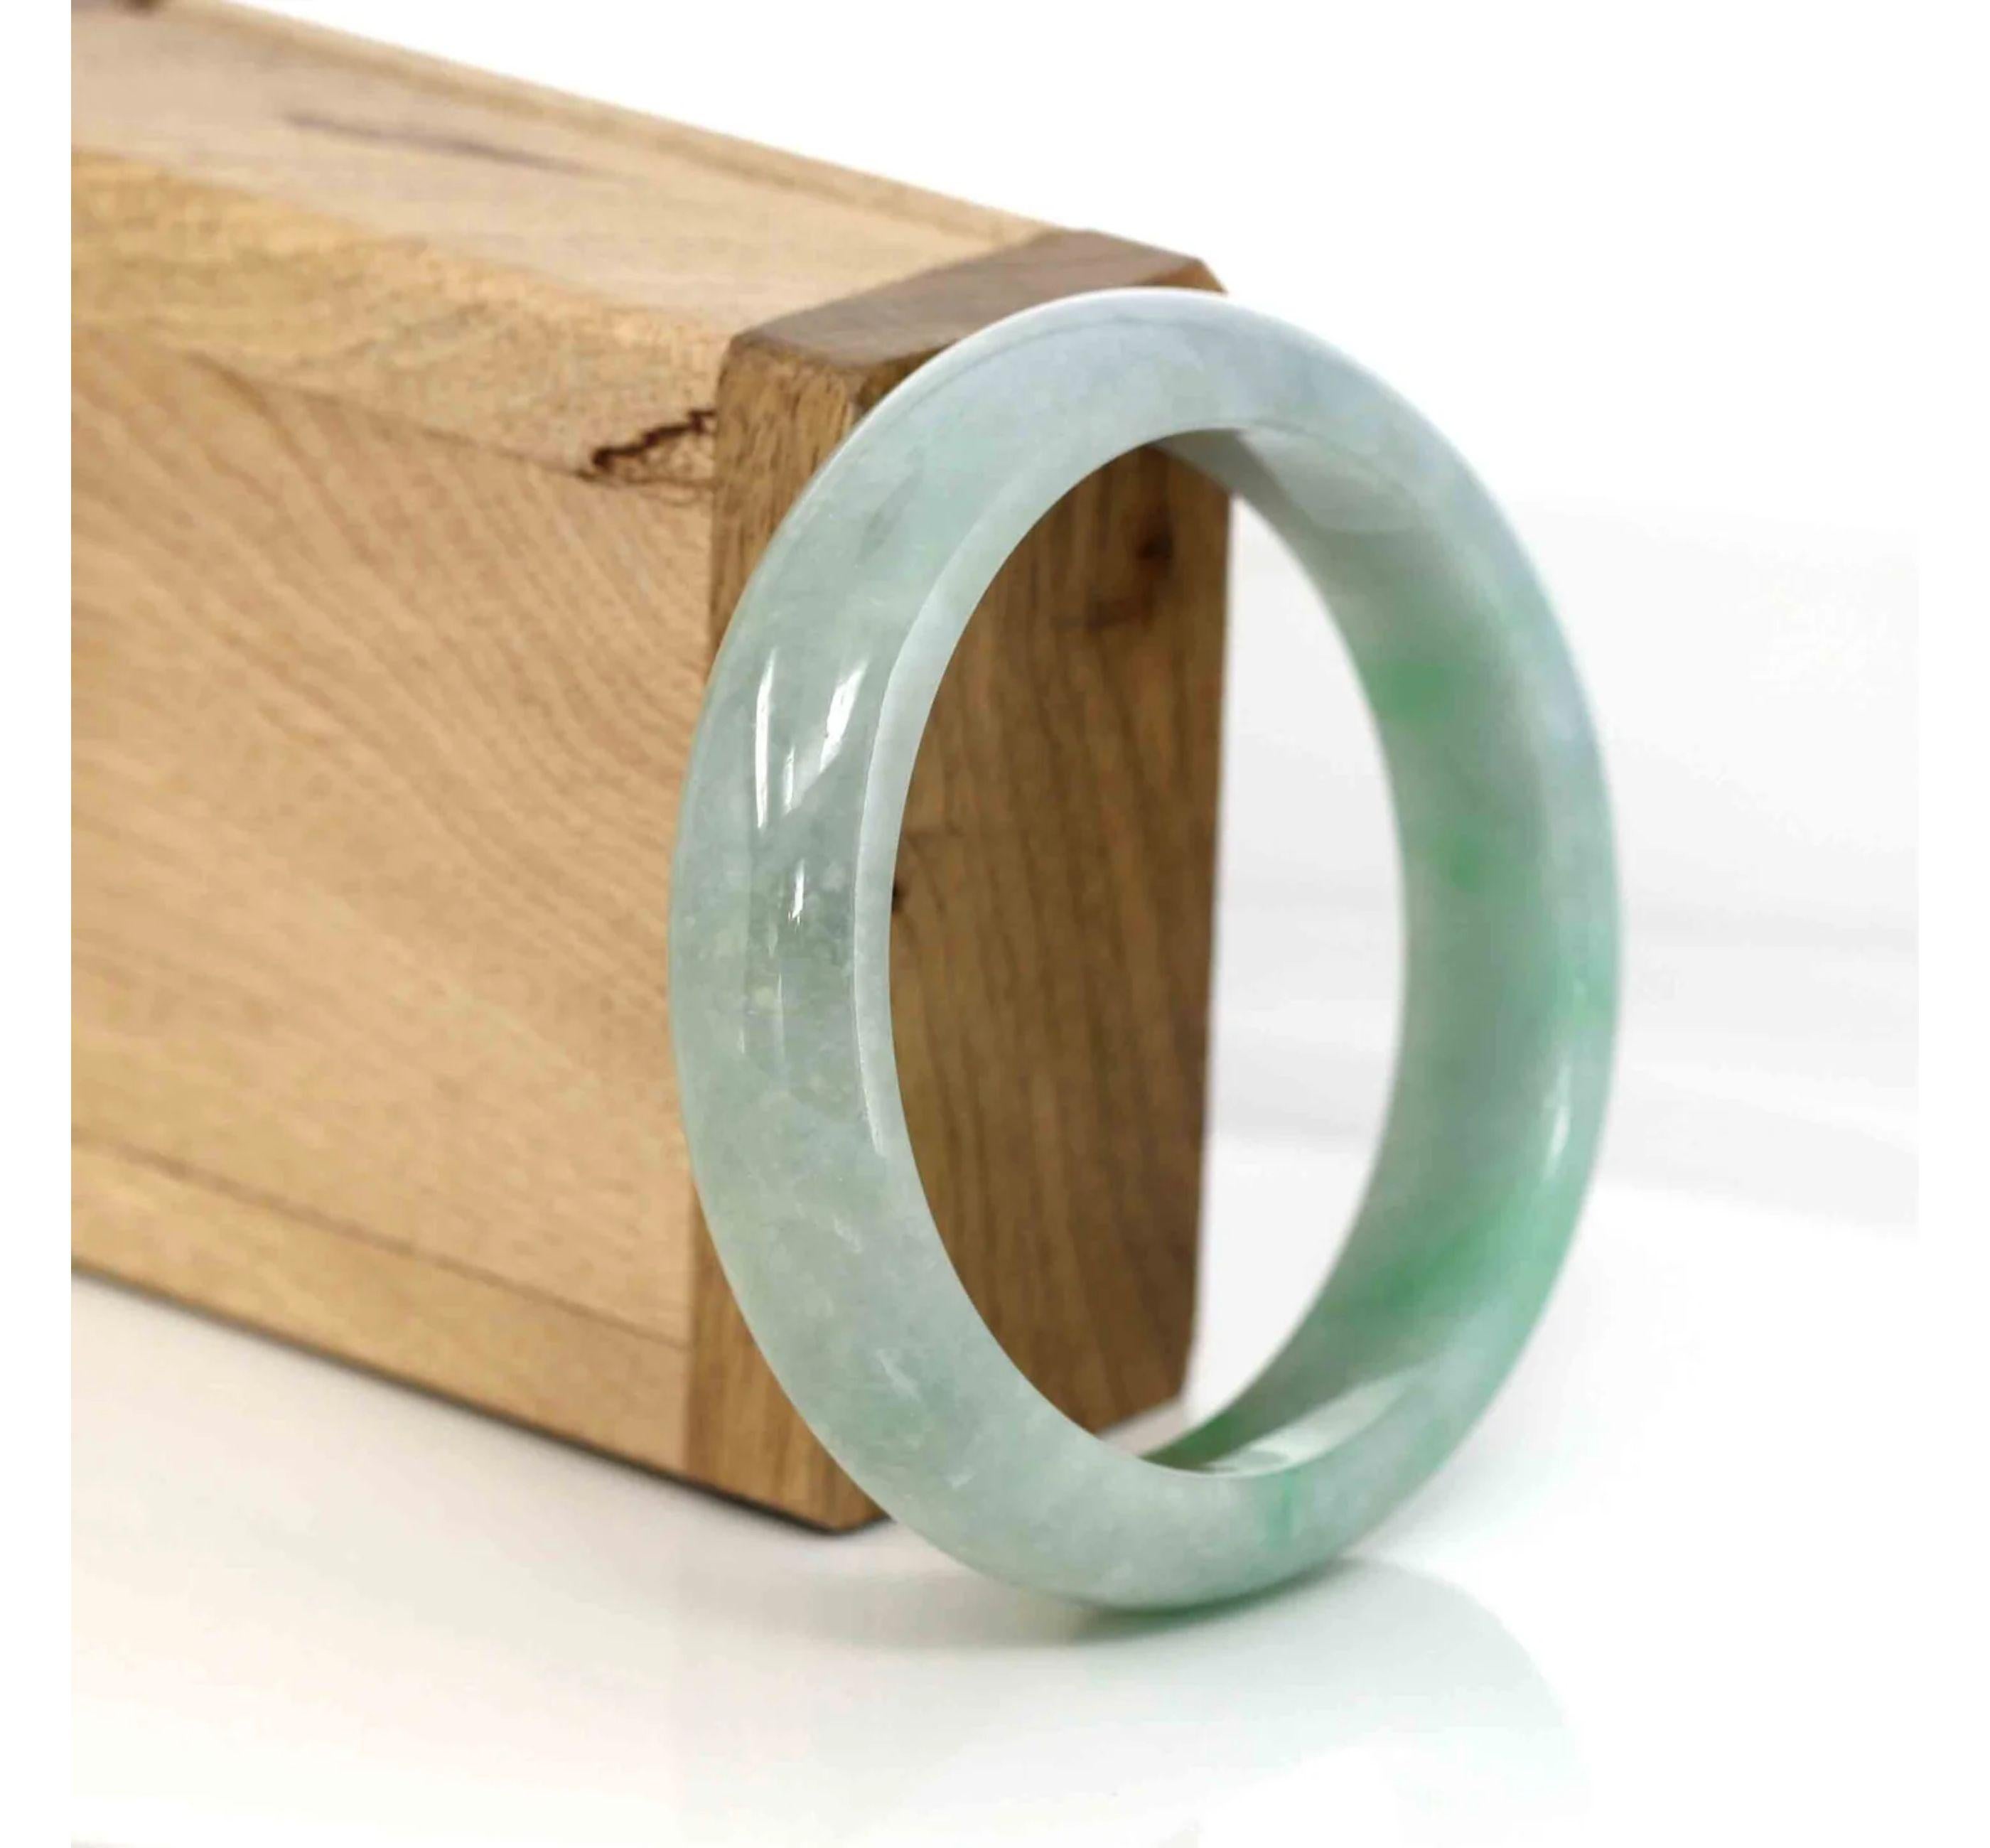 Realjade¨ Co. Classic Green Natural Jadeite Jade Bangle #326 In New Condition For Sale In Portland, OR